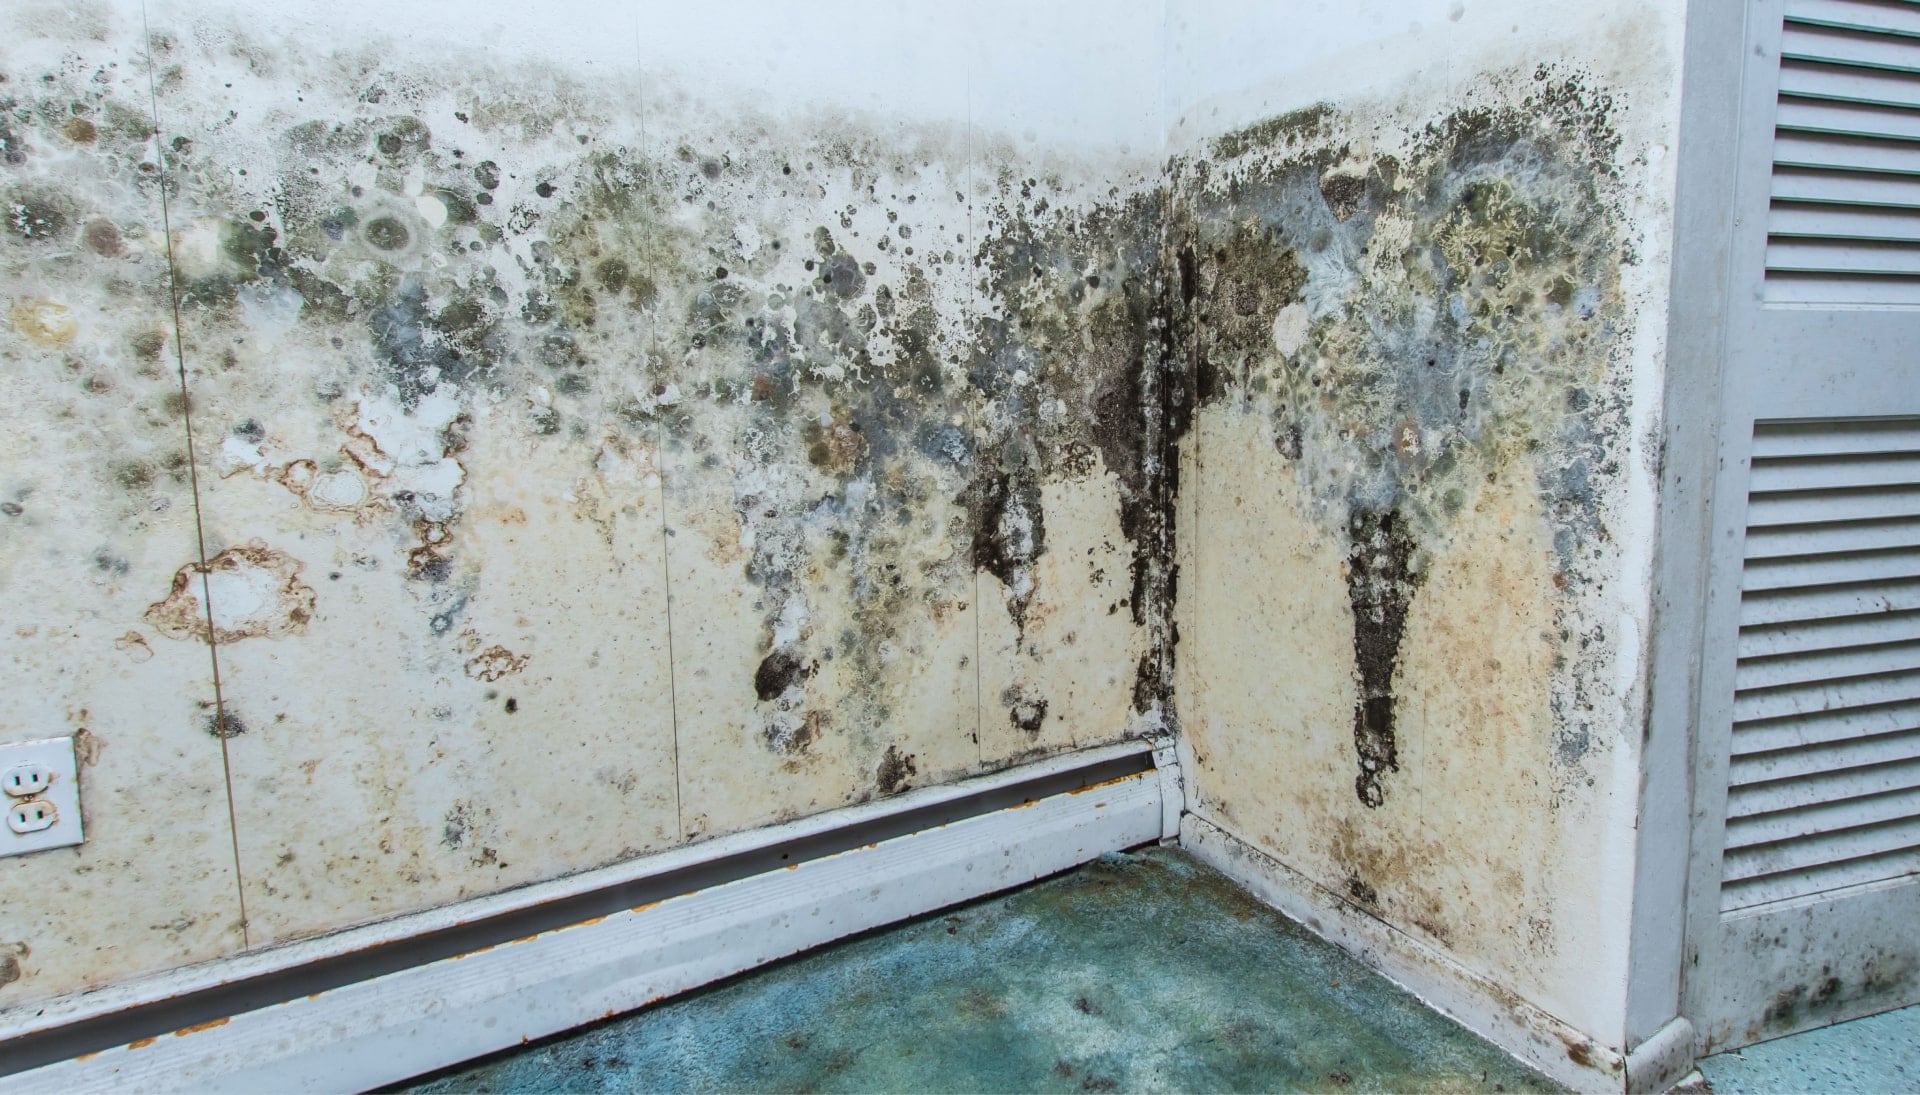 A mold remediation team using specialized techniques to remove mold damage and control odors in a Wellington property, with a focus on safety and efficiency